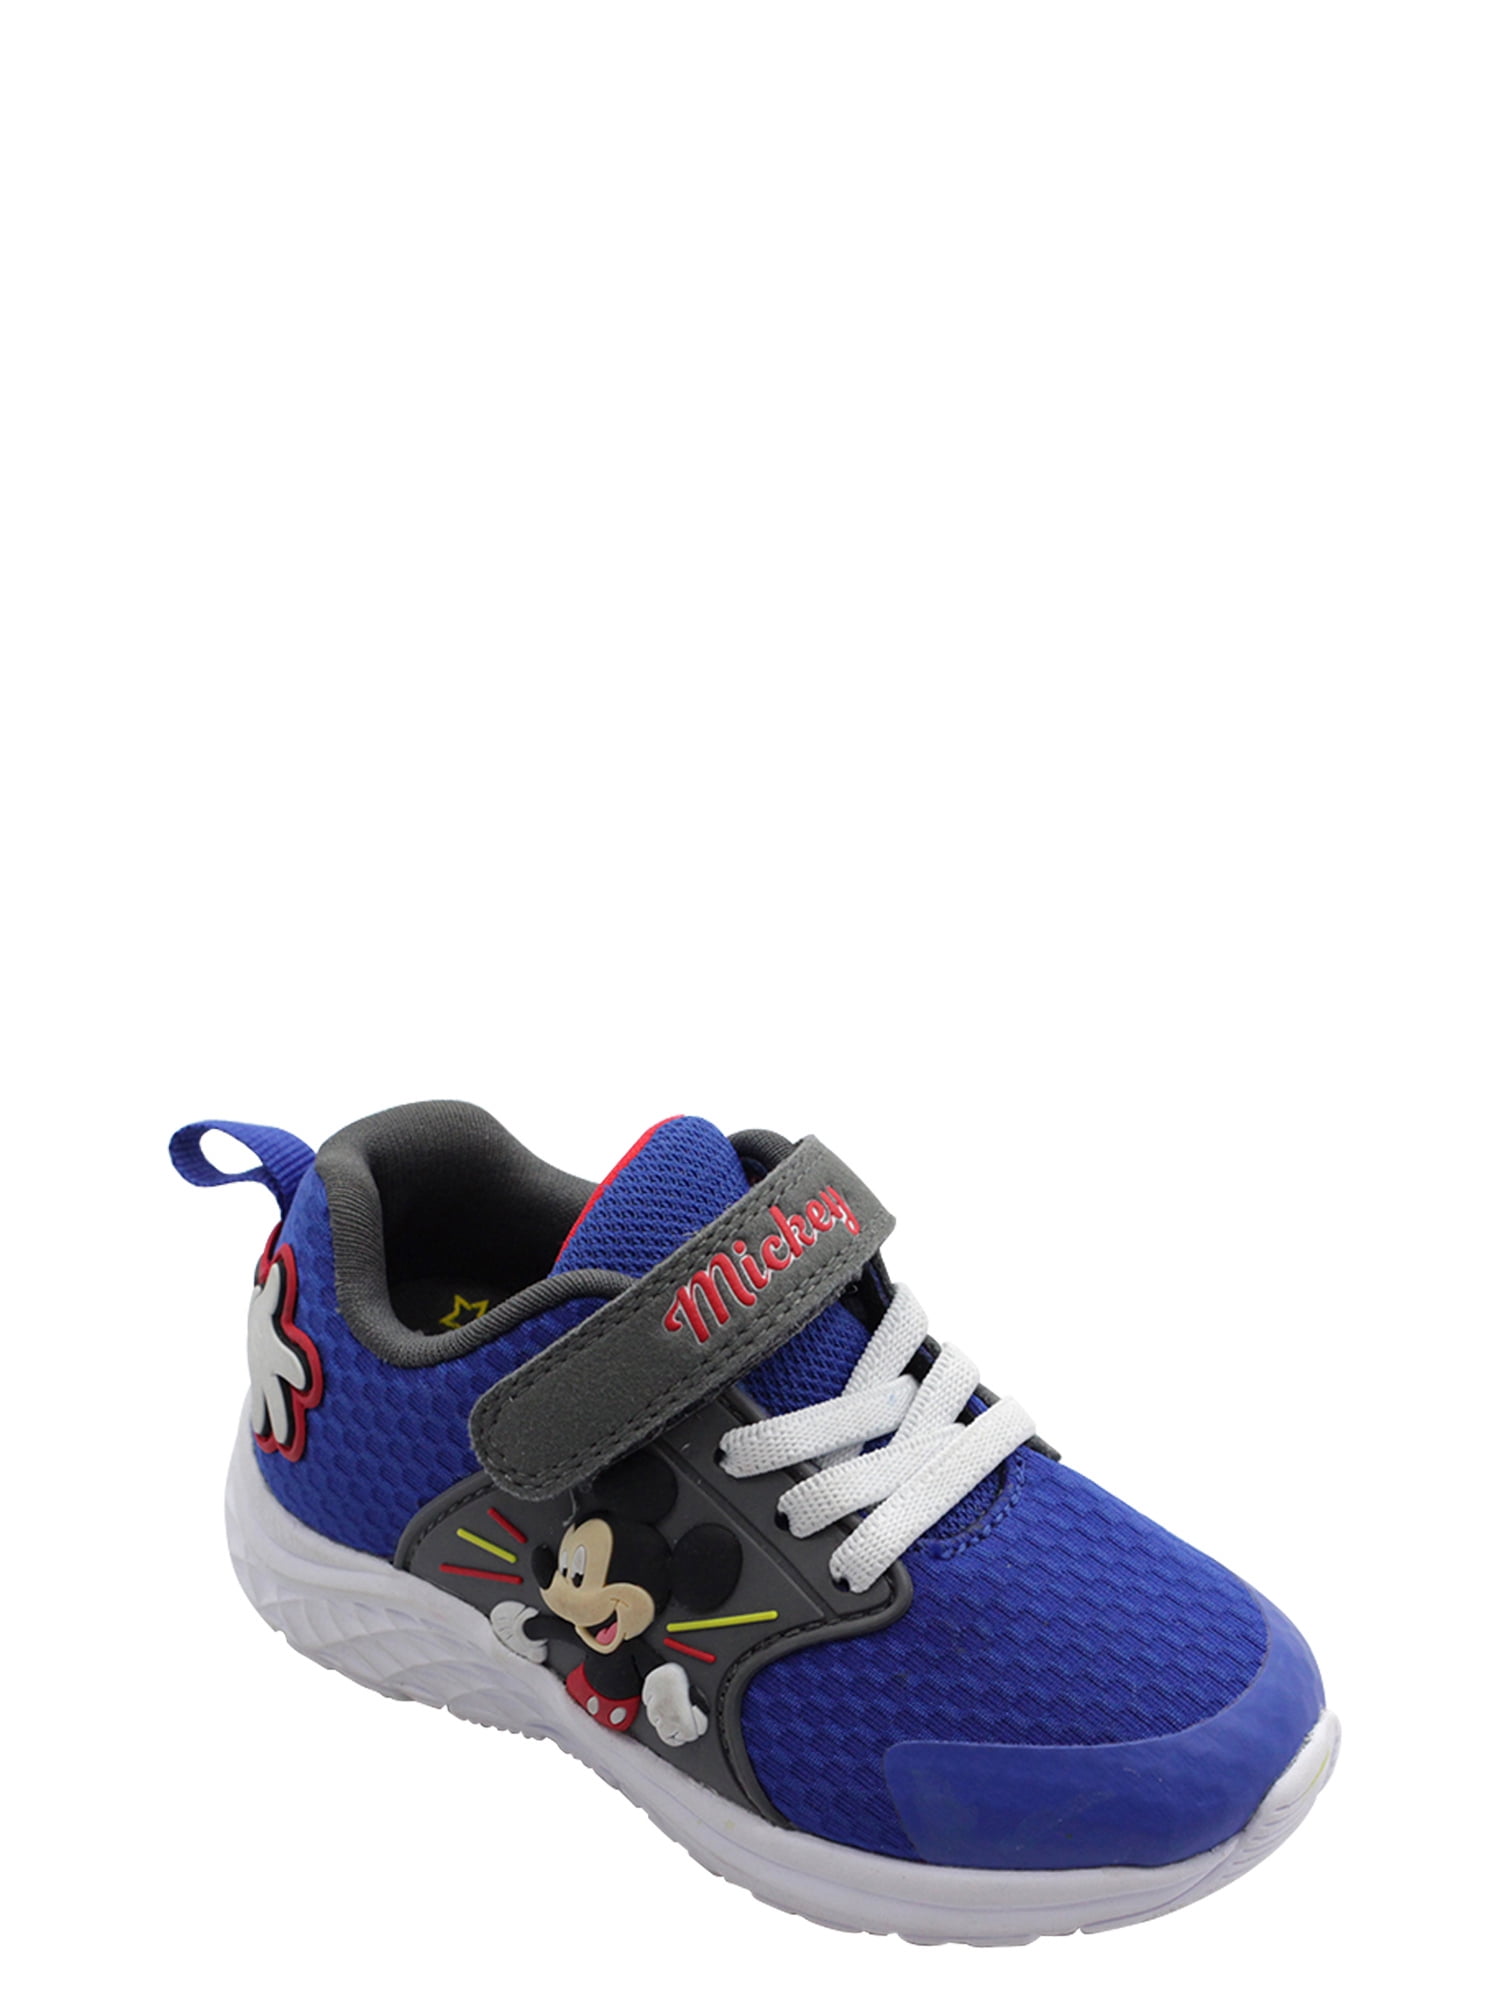 Toddler Boys Mickey Mouse Athletic Shoe 